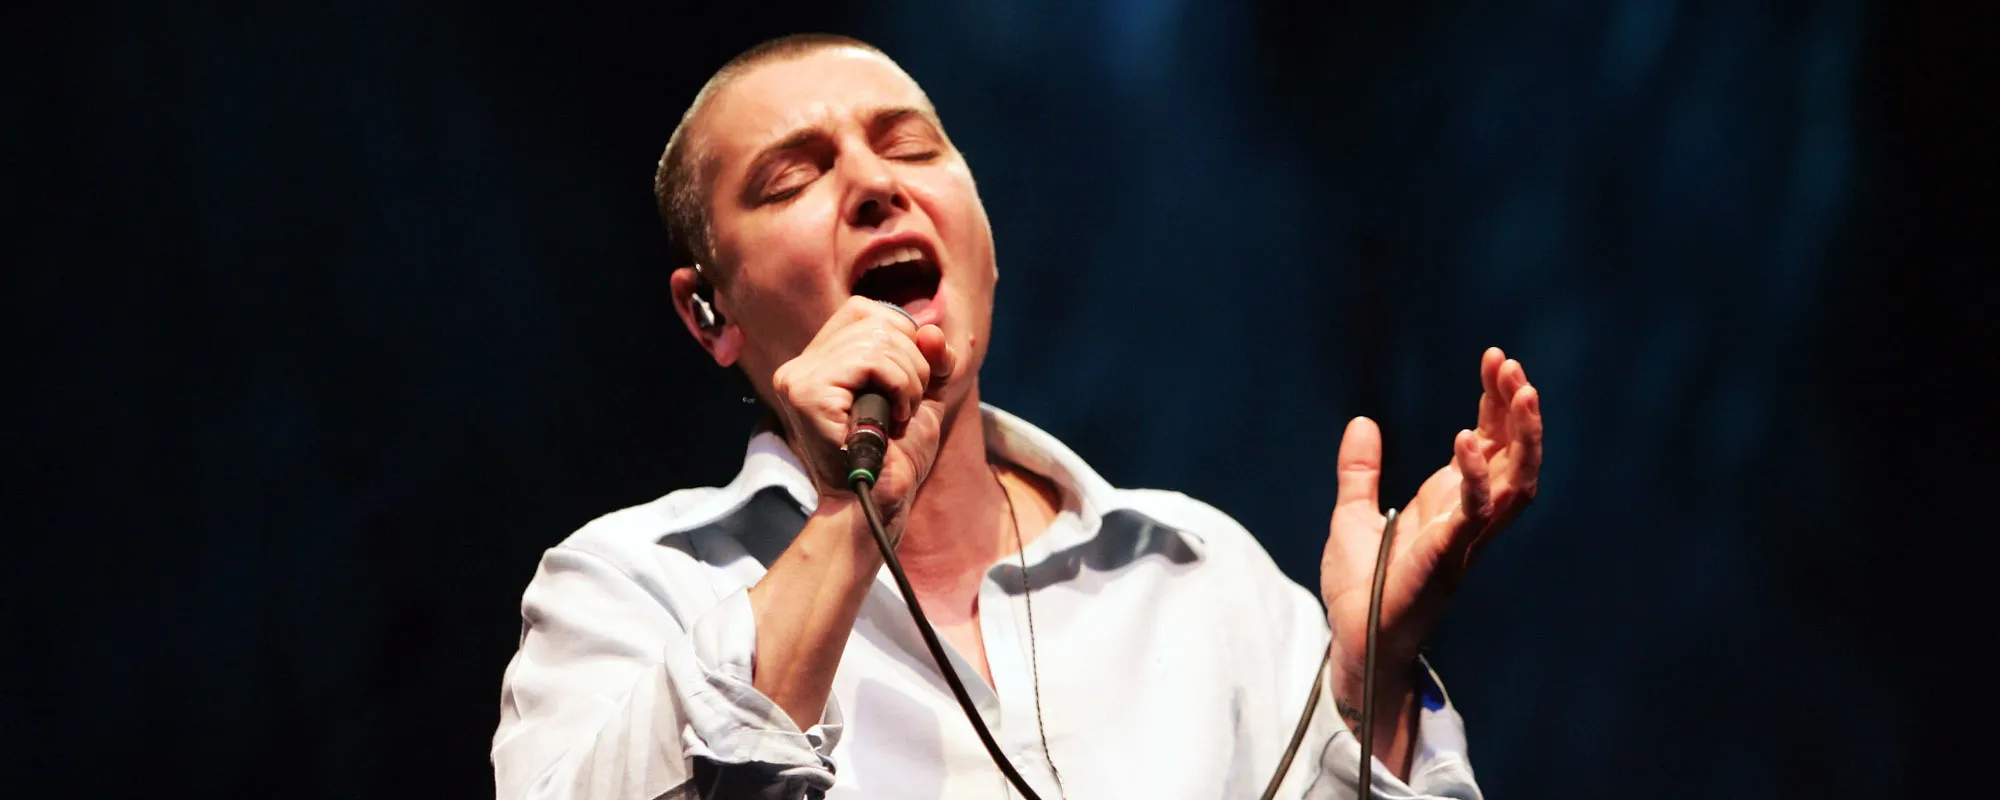 Remember When: Sinead O’Connor Protested Against The Pope On ‘SNL’